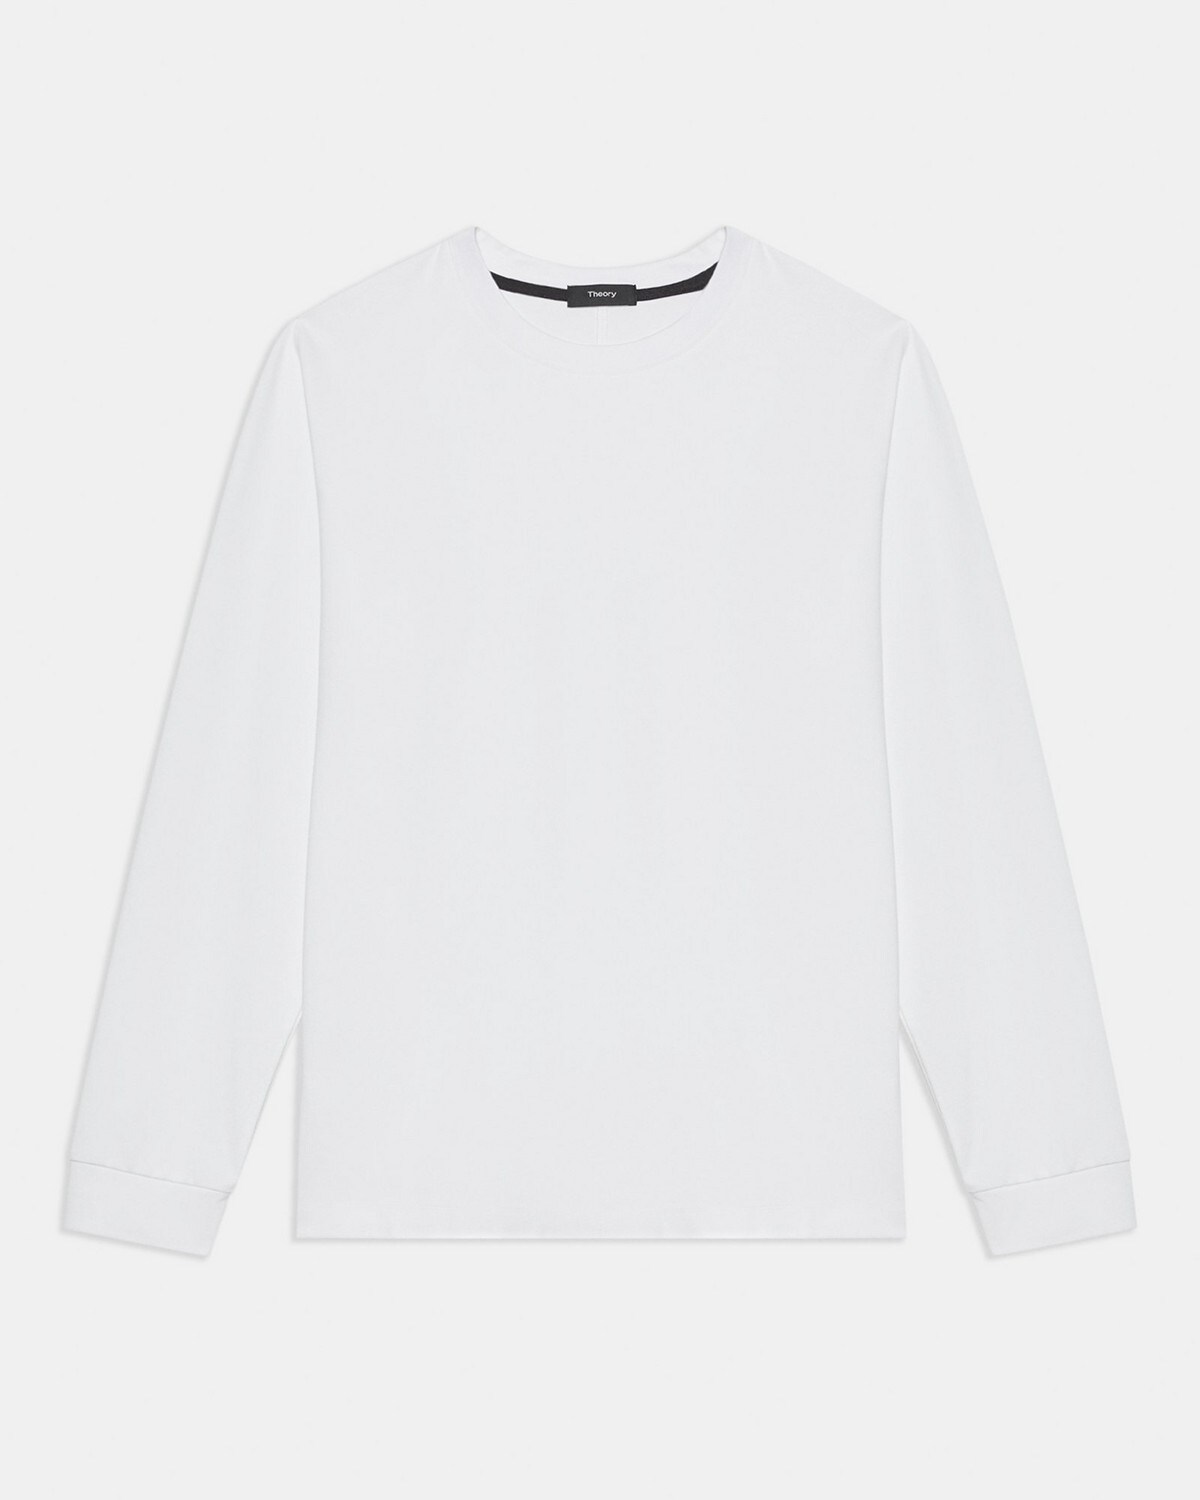 Ryder Long-Sleeve Tee in Relay Jersey